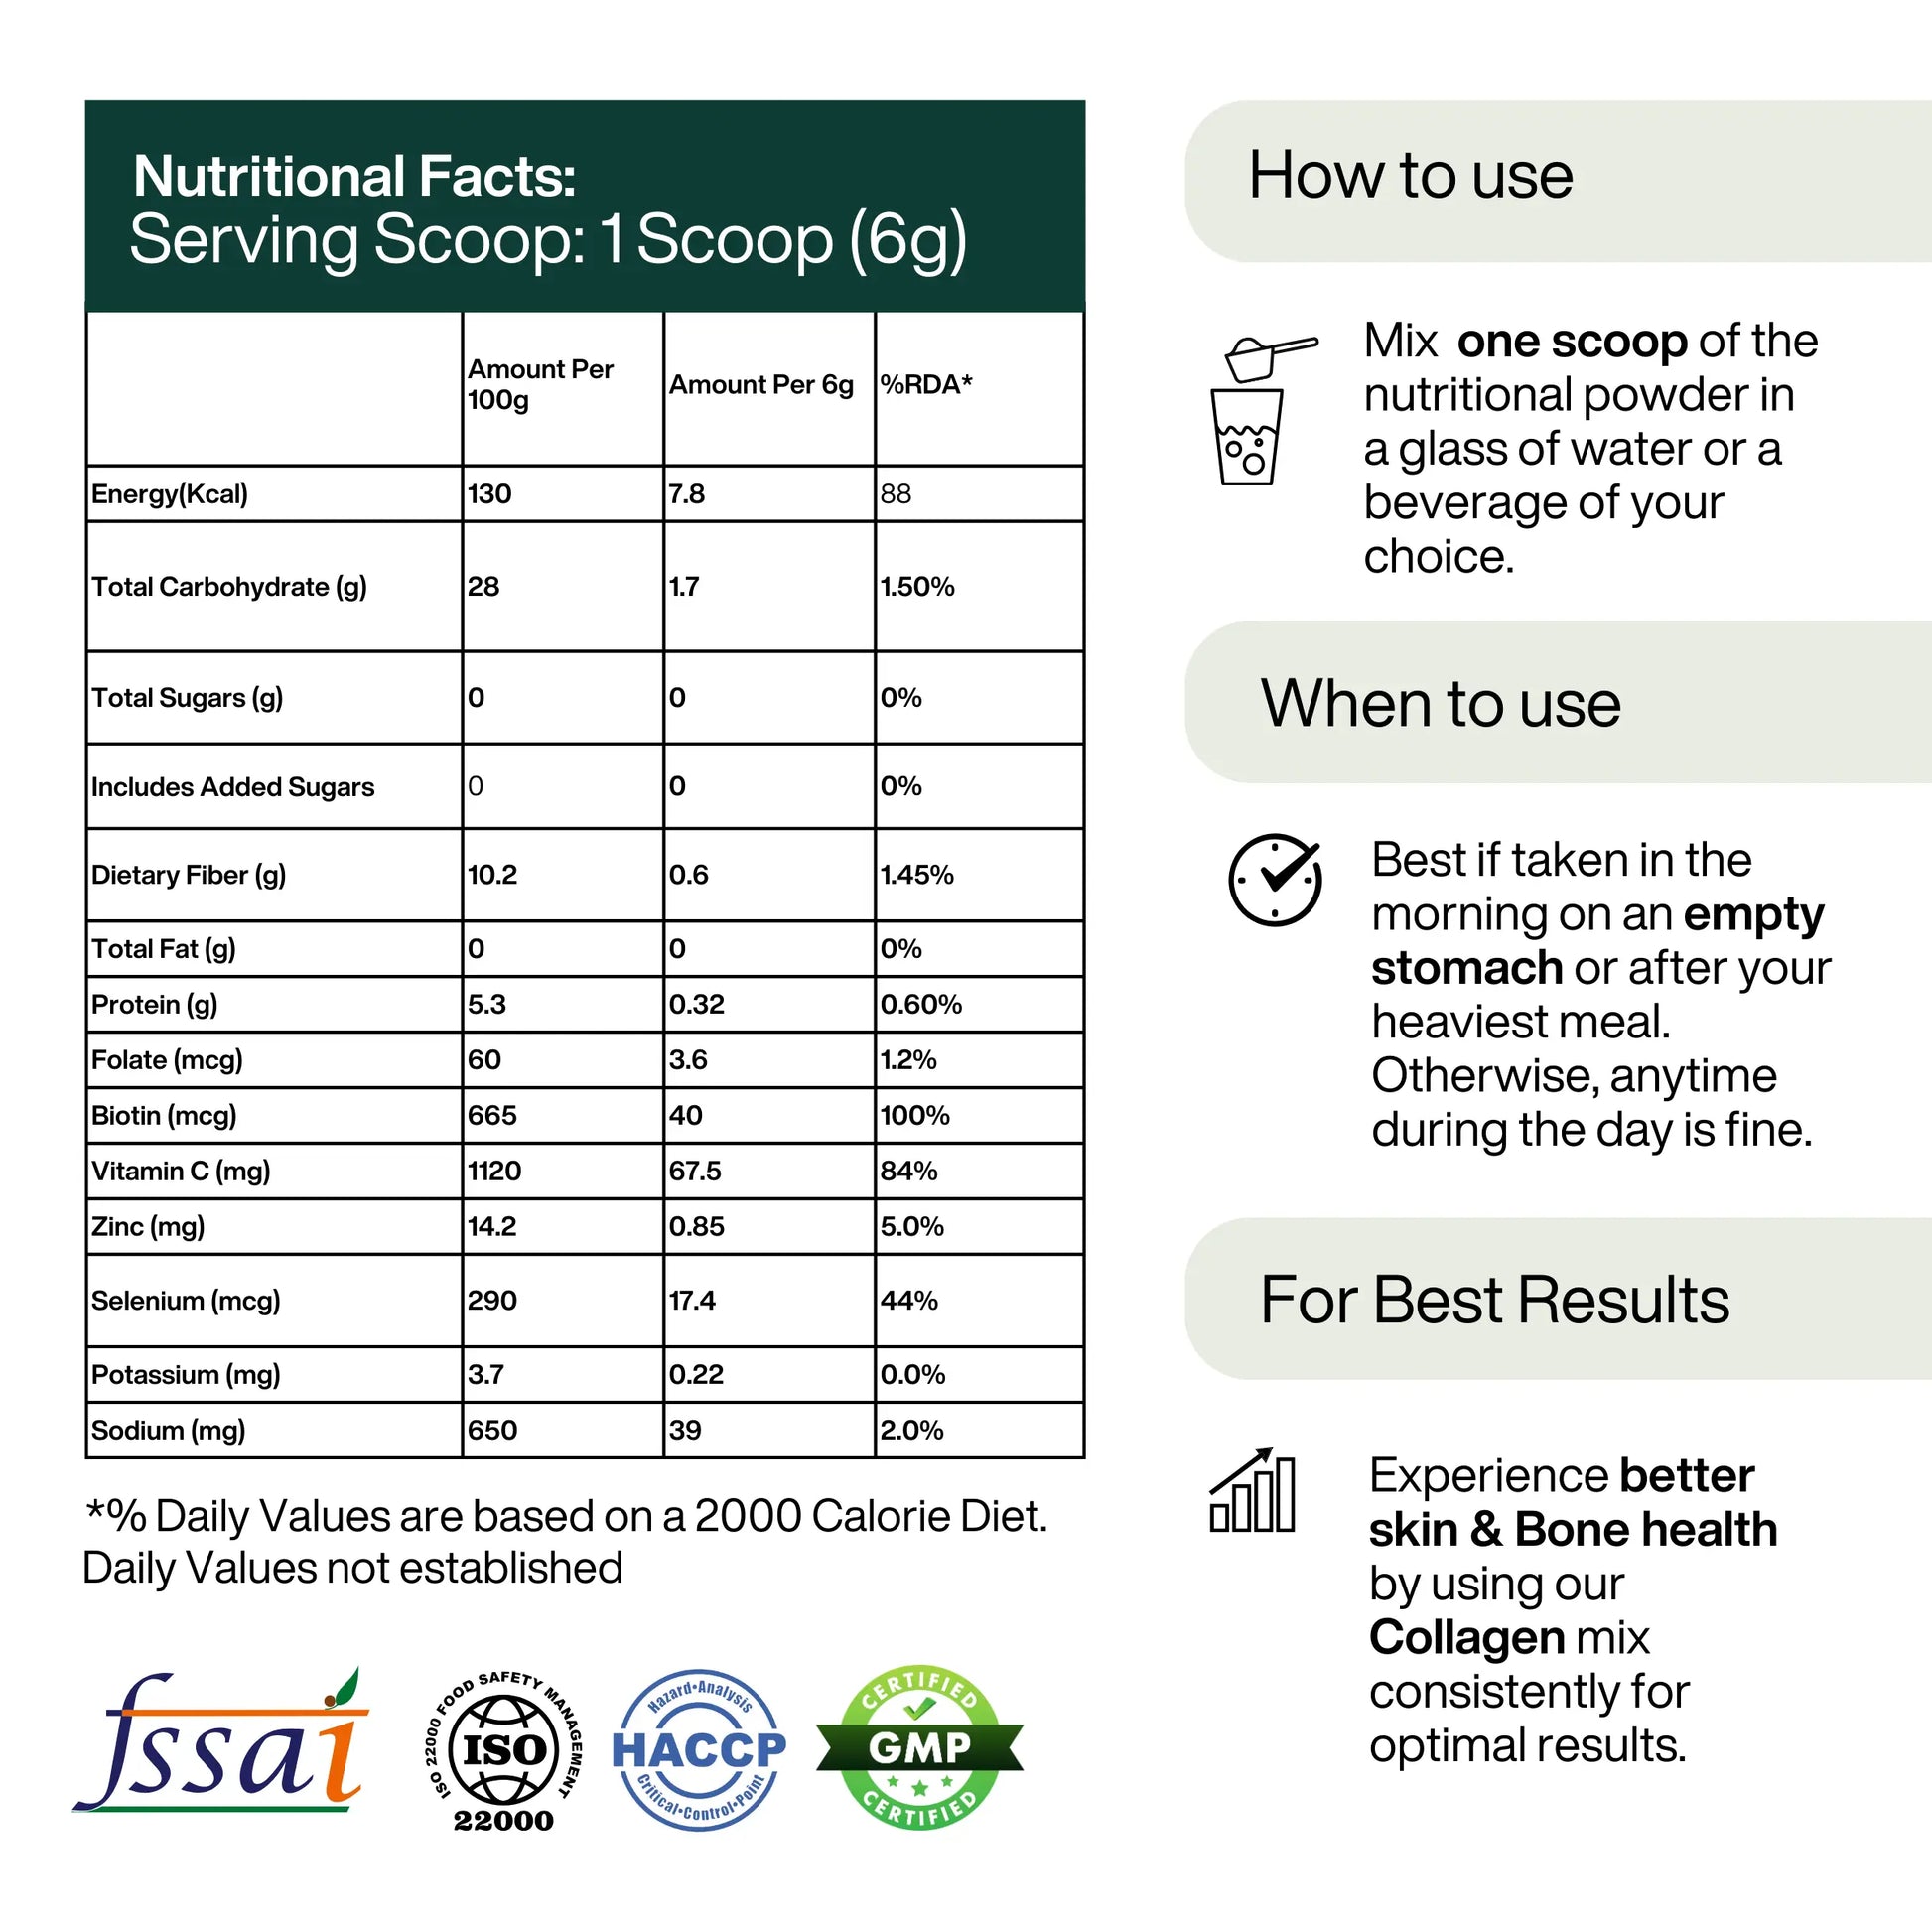 Picture of Puretive's Daily Collagen Nutrition Mix's Nutritional Facts, How to use, When to use & How to get the Best Resuts. Also Certifications like FSSAI, ISO, HACCP & GMP are mentioned.